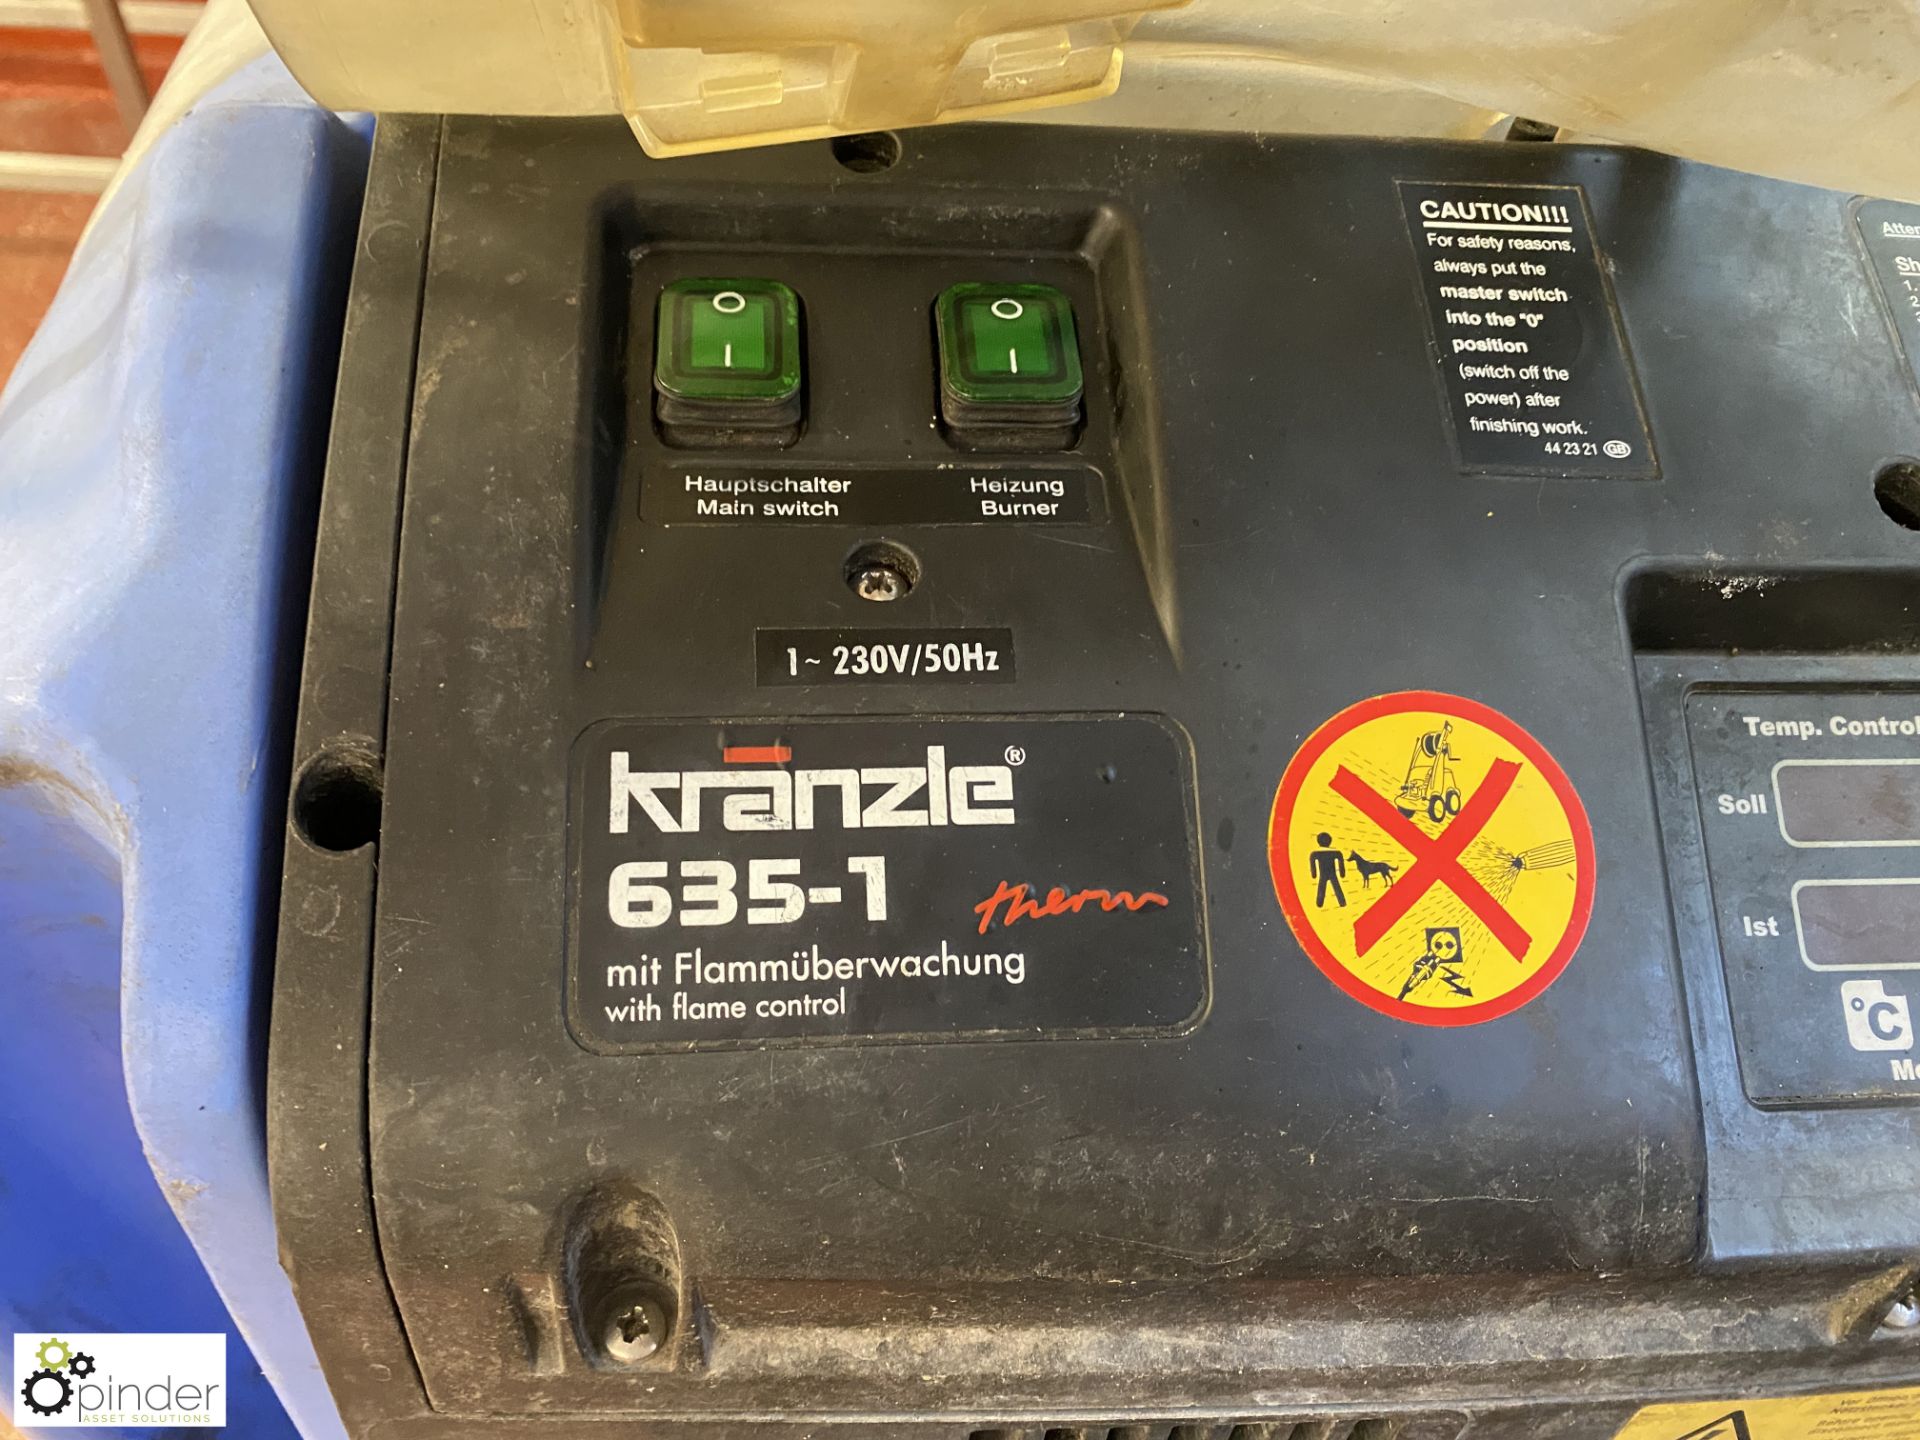 Kranzle 635-1 Steam Cleaner, no lance or hose (Lift Out Fee: £20 plus VAT) - Image 4 of 7